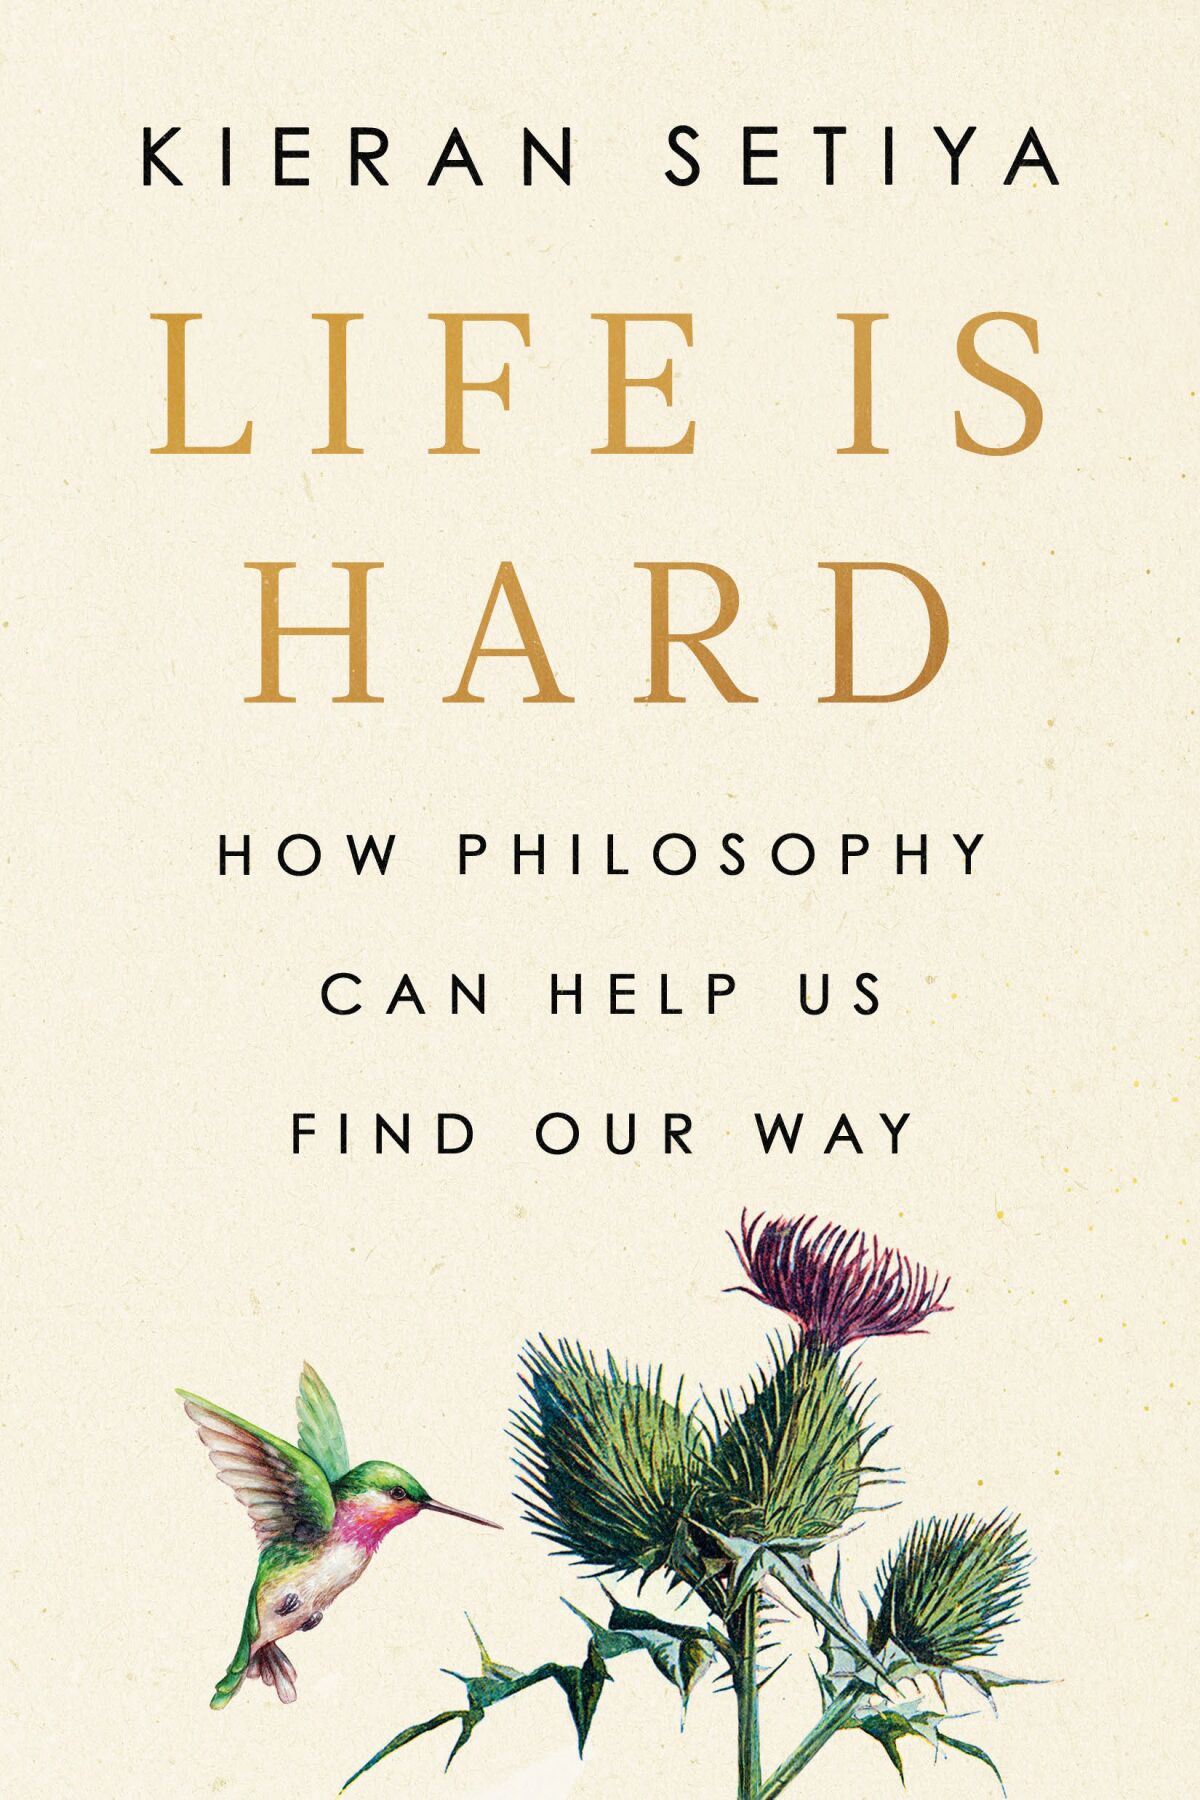 Book cover for "Life Is Hard: How Philosophy Can Help Us Find Our Way" by Kieran Setiya